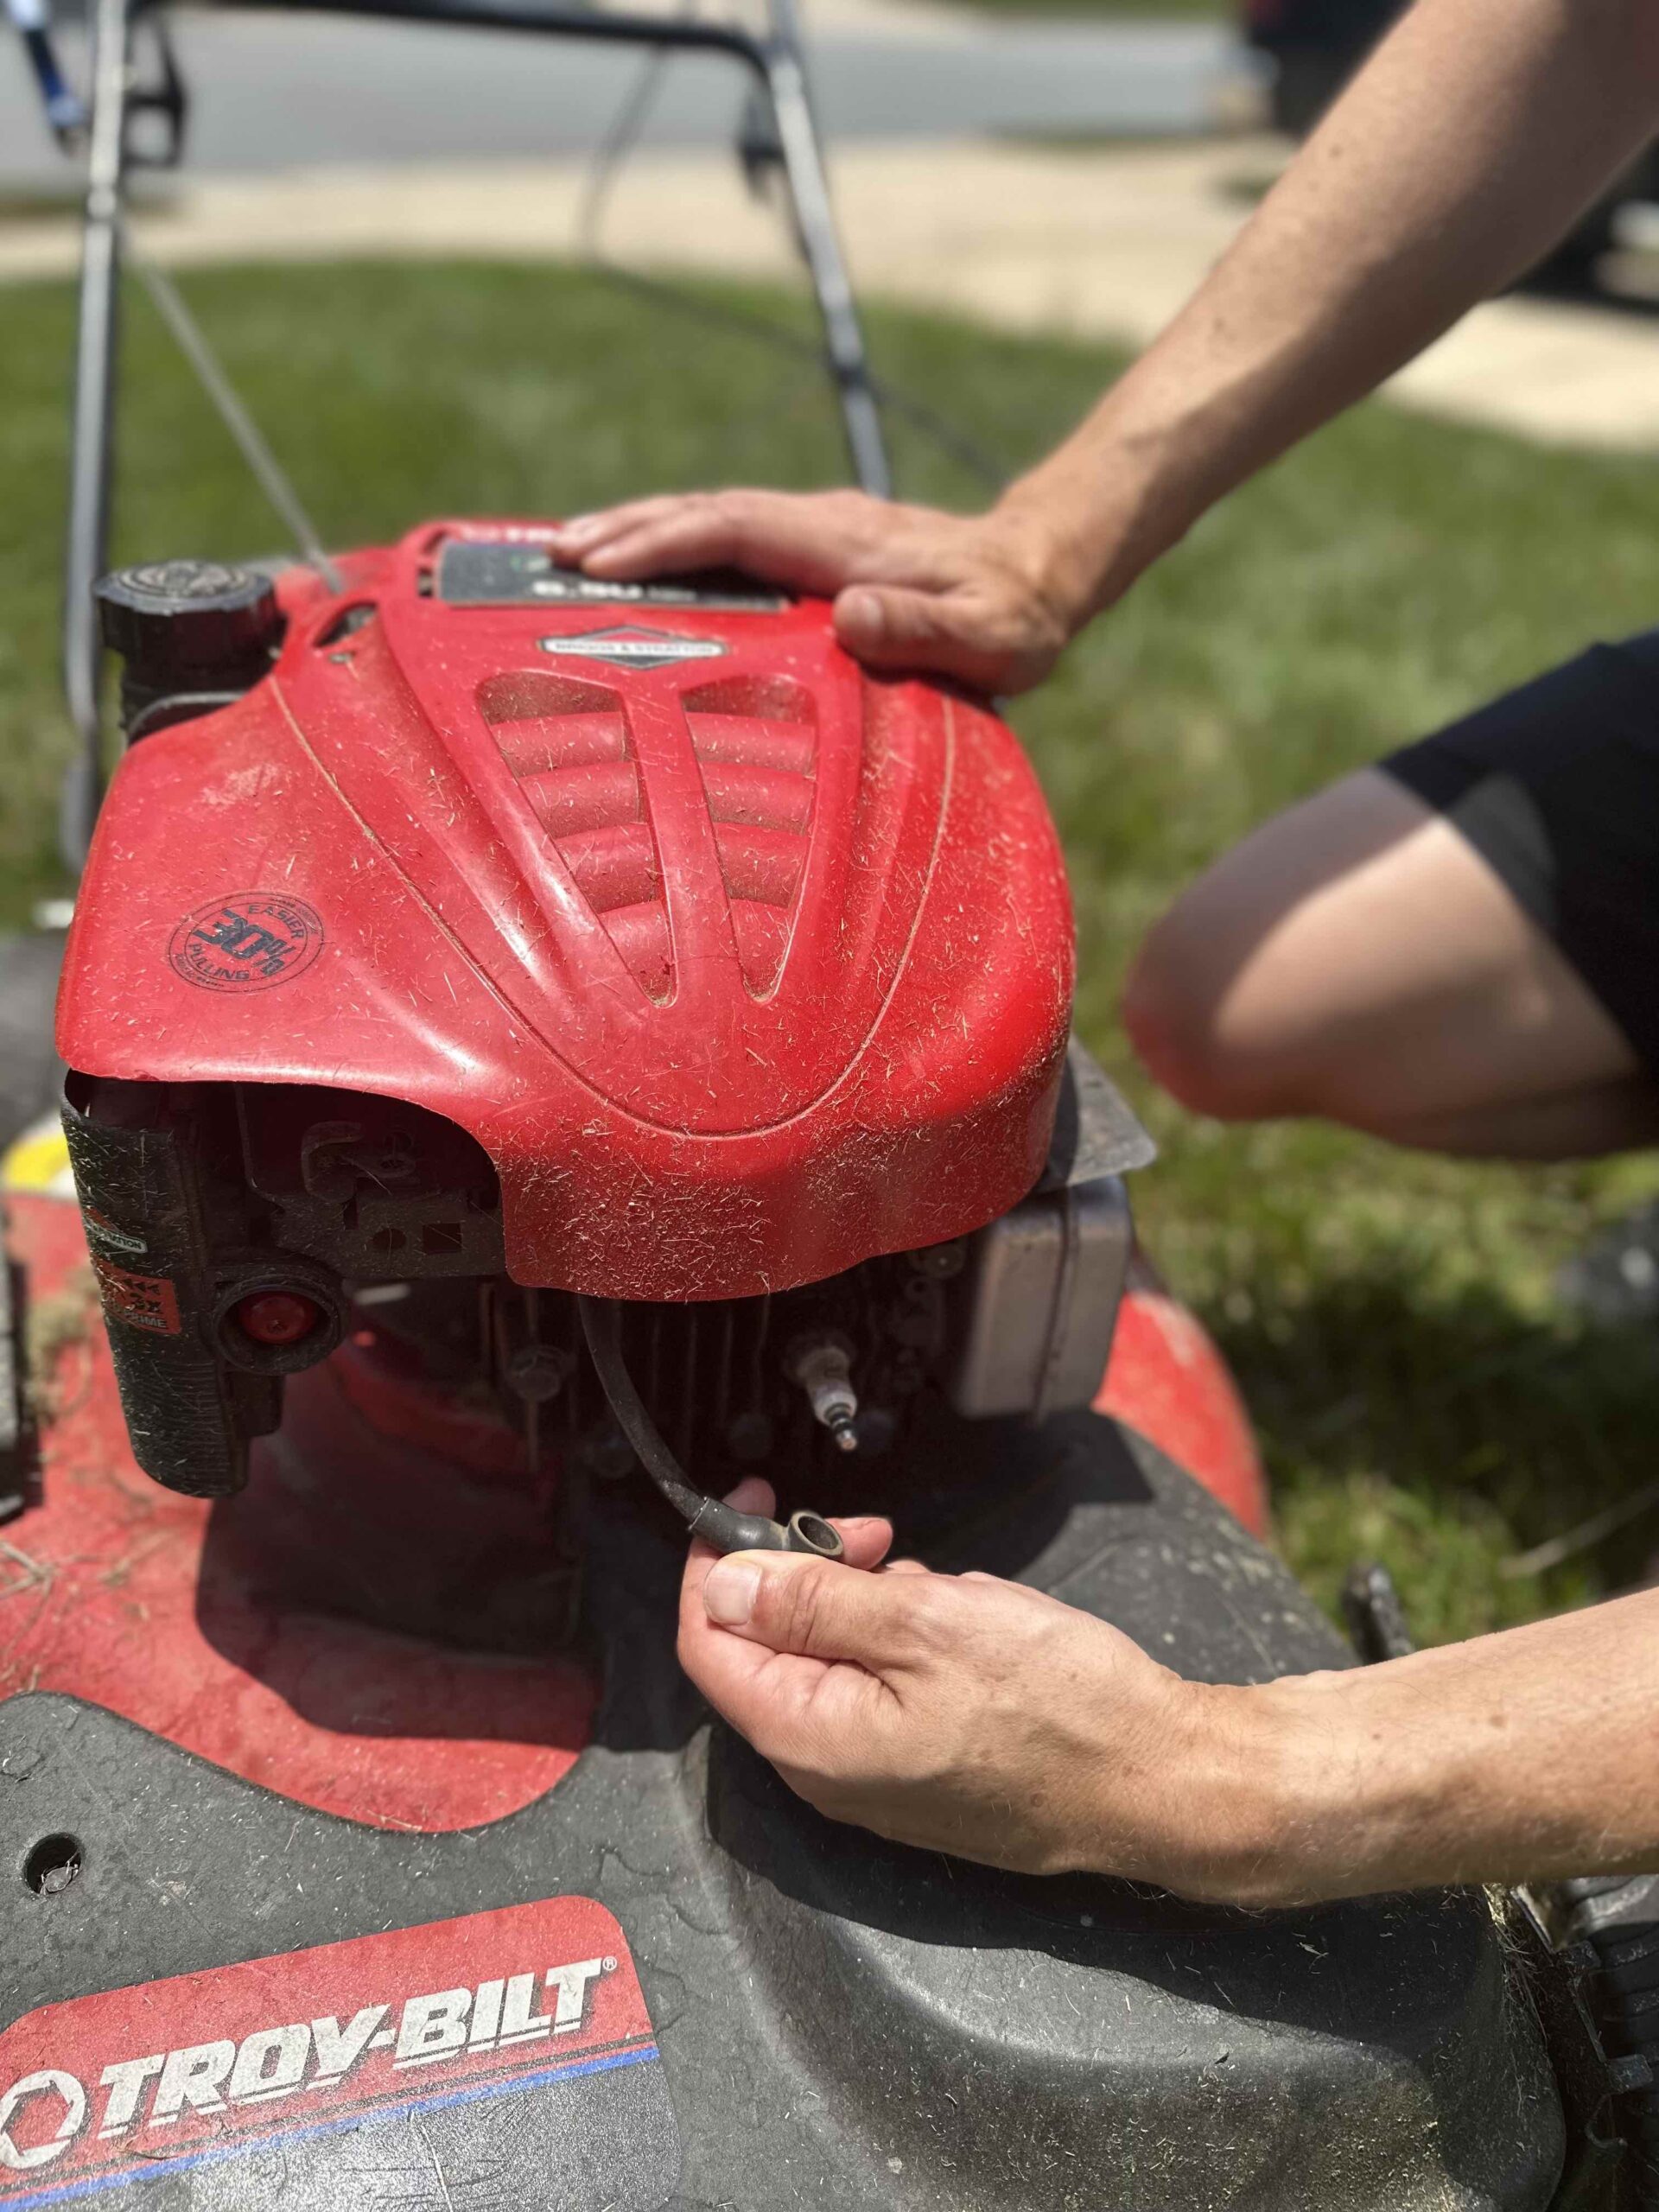 Removing sparkplug from lawn mower